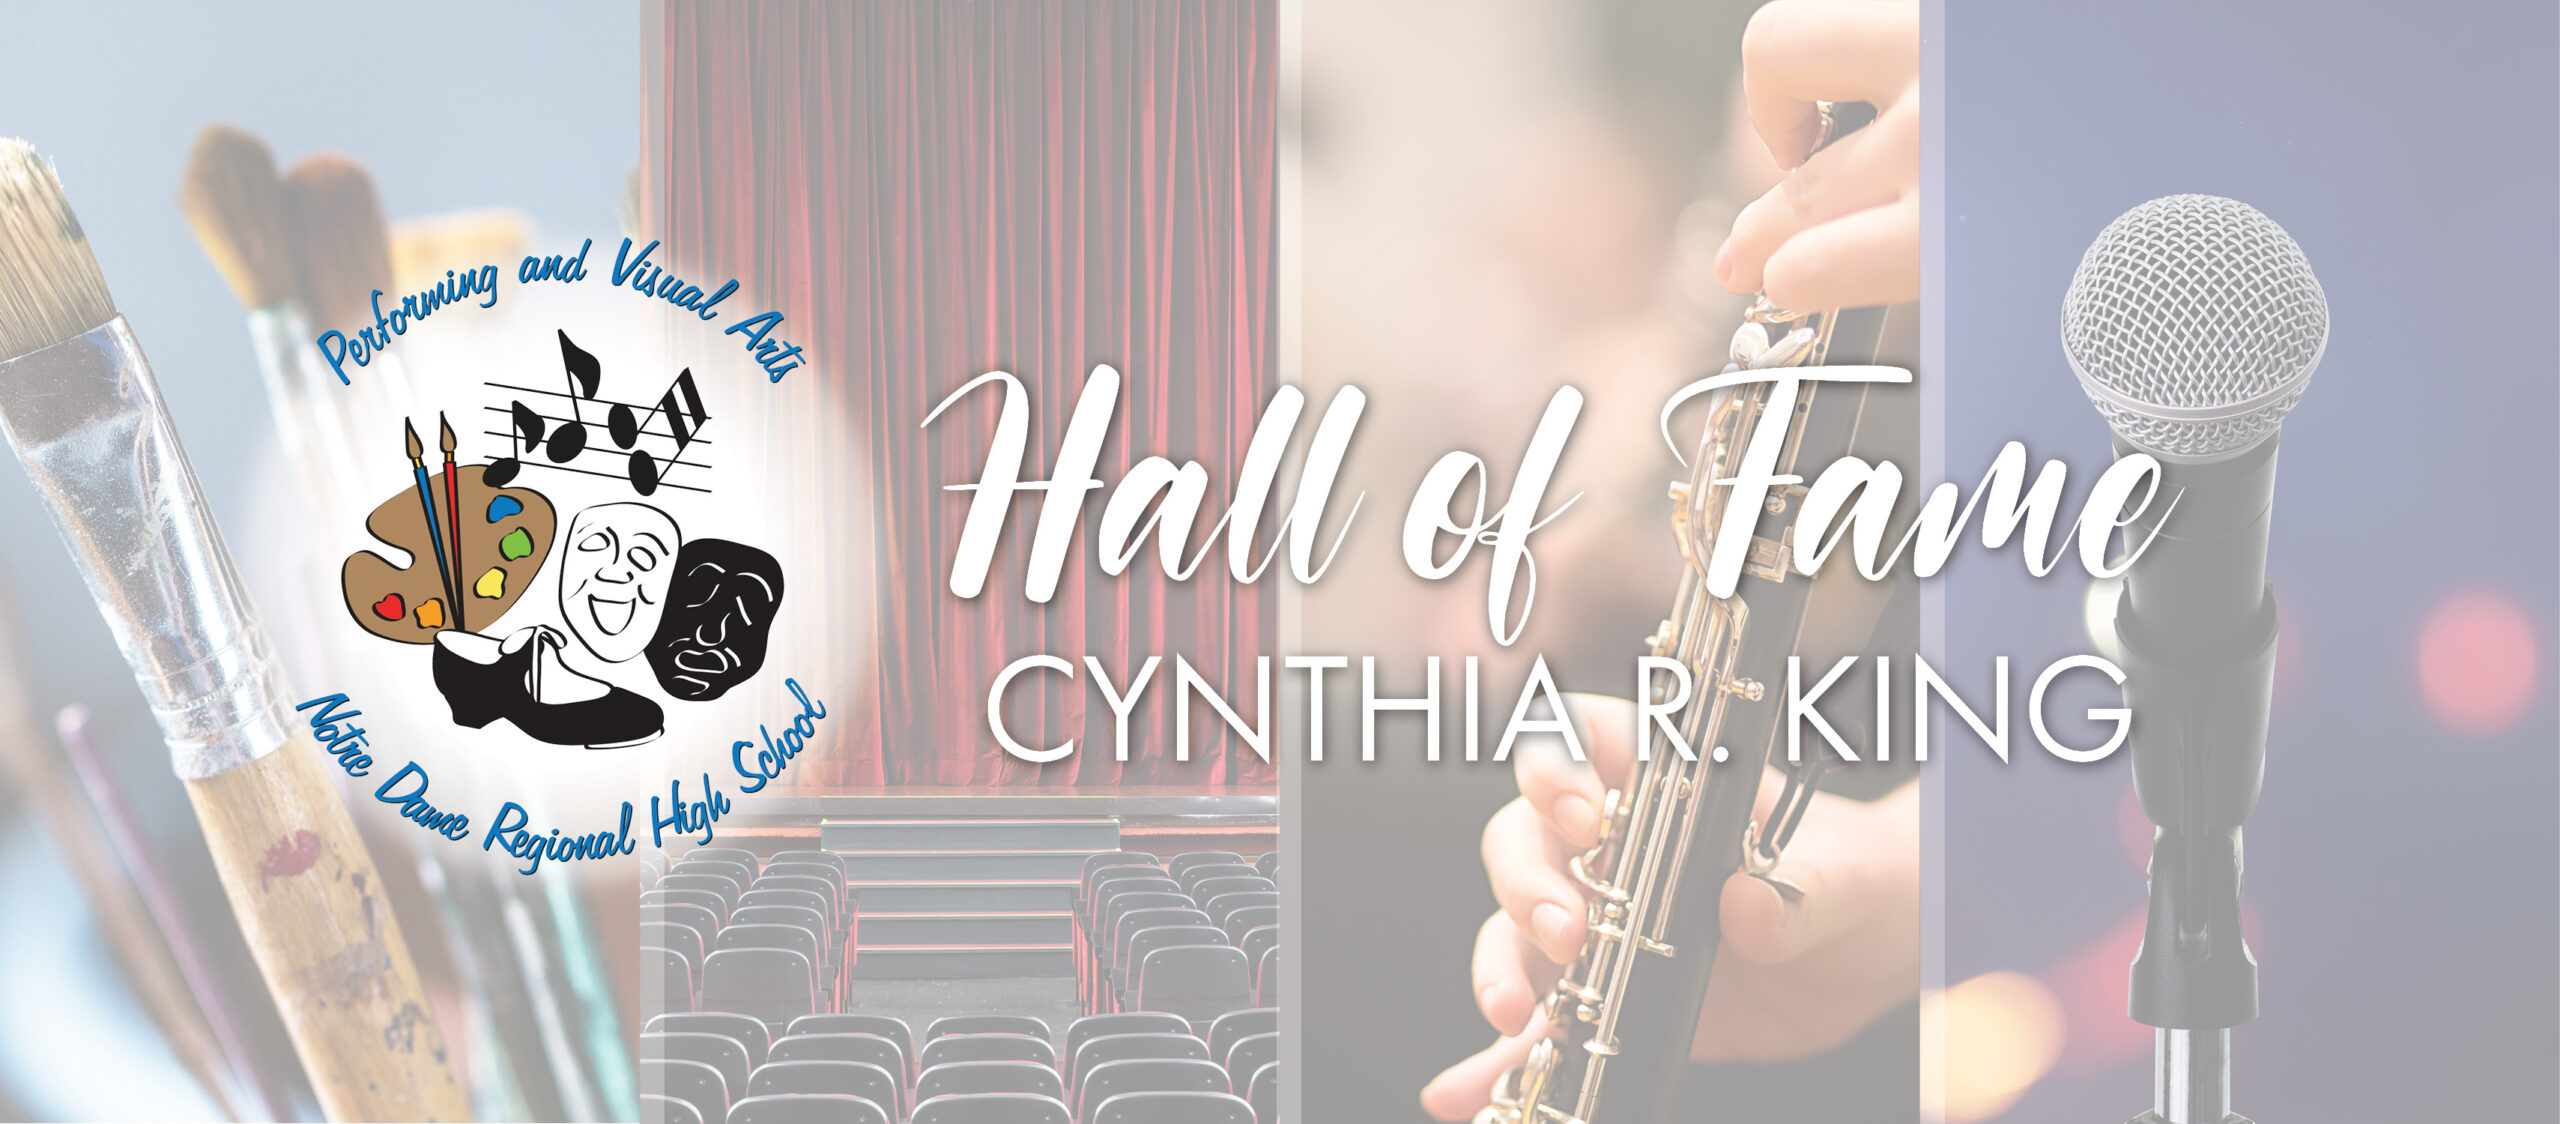 2022 PAVA Hall of Fame Inductee: Cynthia R. King - Notre Dame Regional High  School